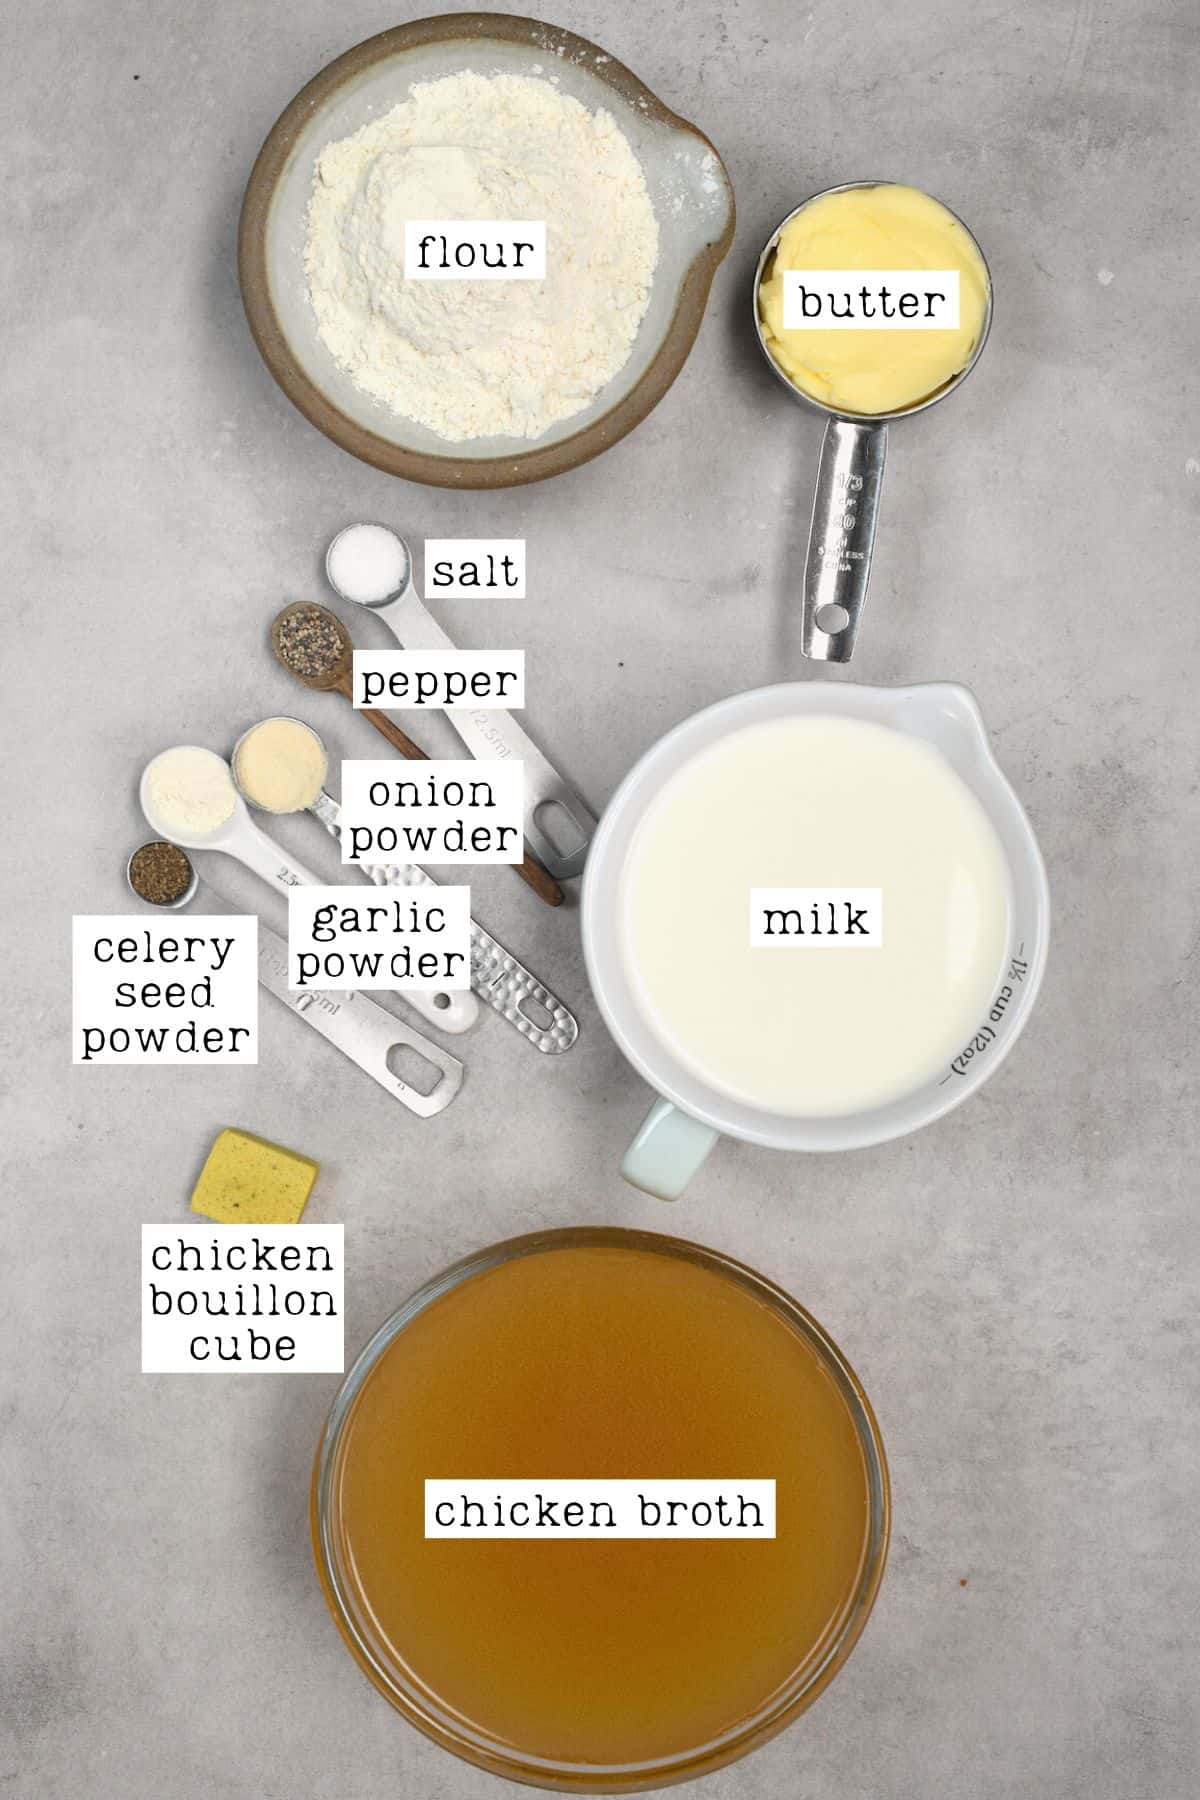 Ingredients for cream of chicken soup